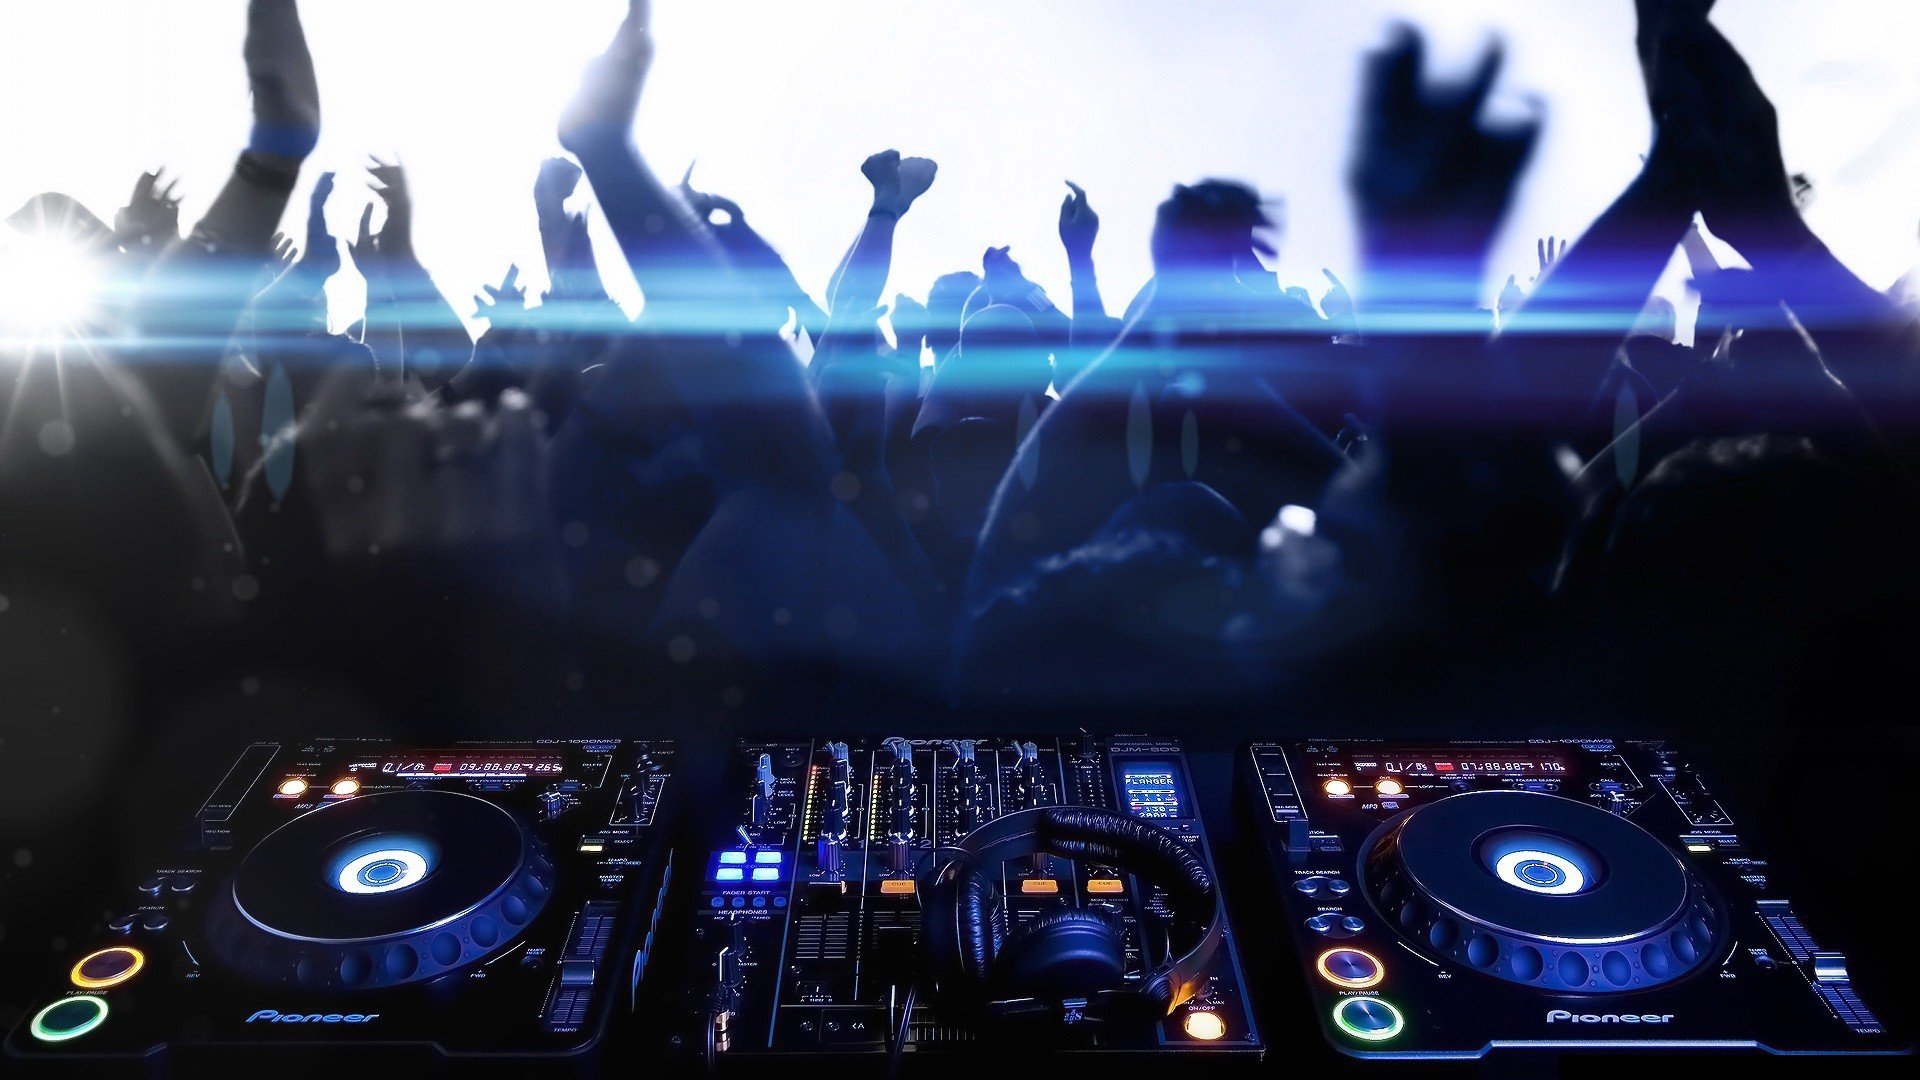 Music Techno Party Cdj 1000 Pioneer Dj Djm 800 Wallpapers Hd Desktop And Mobile Backgrounds